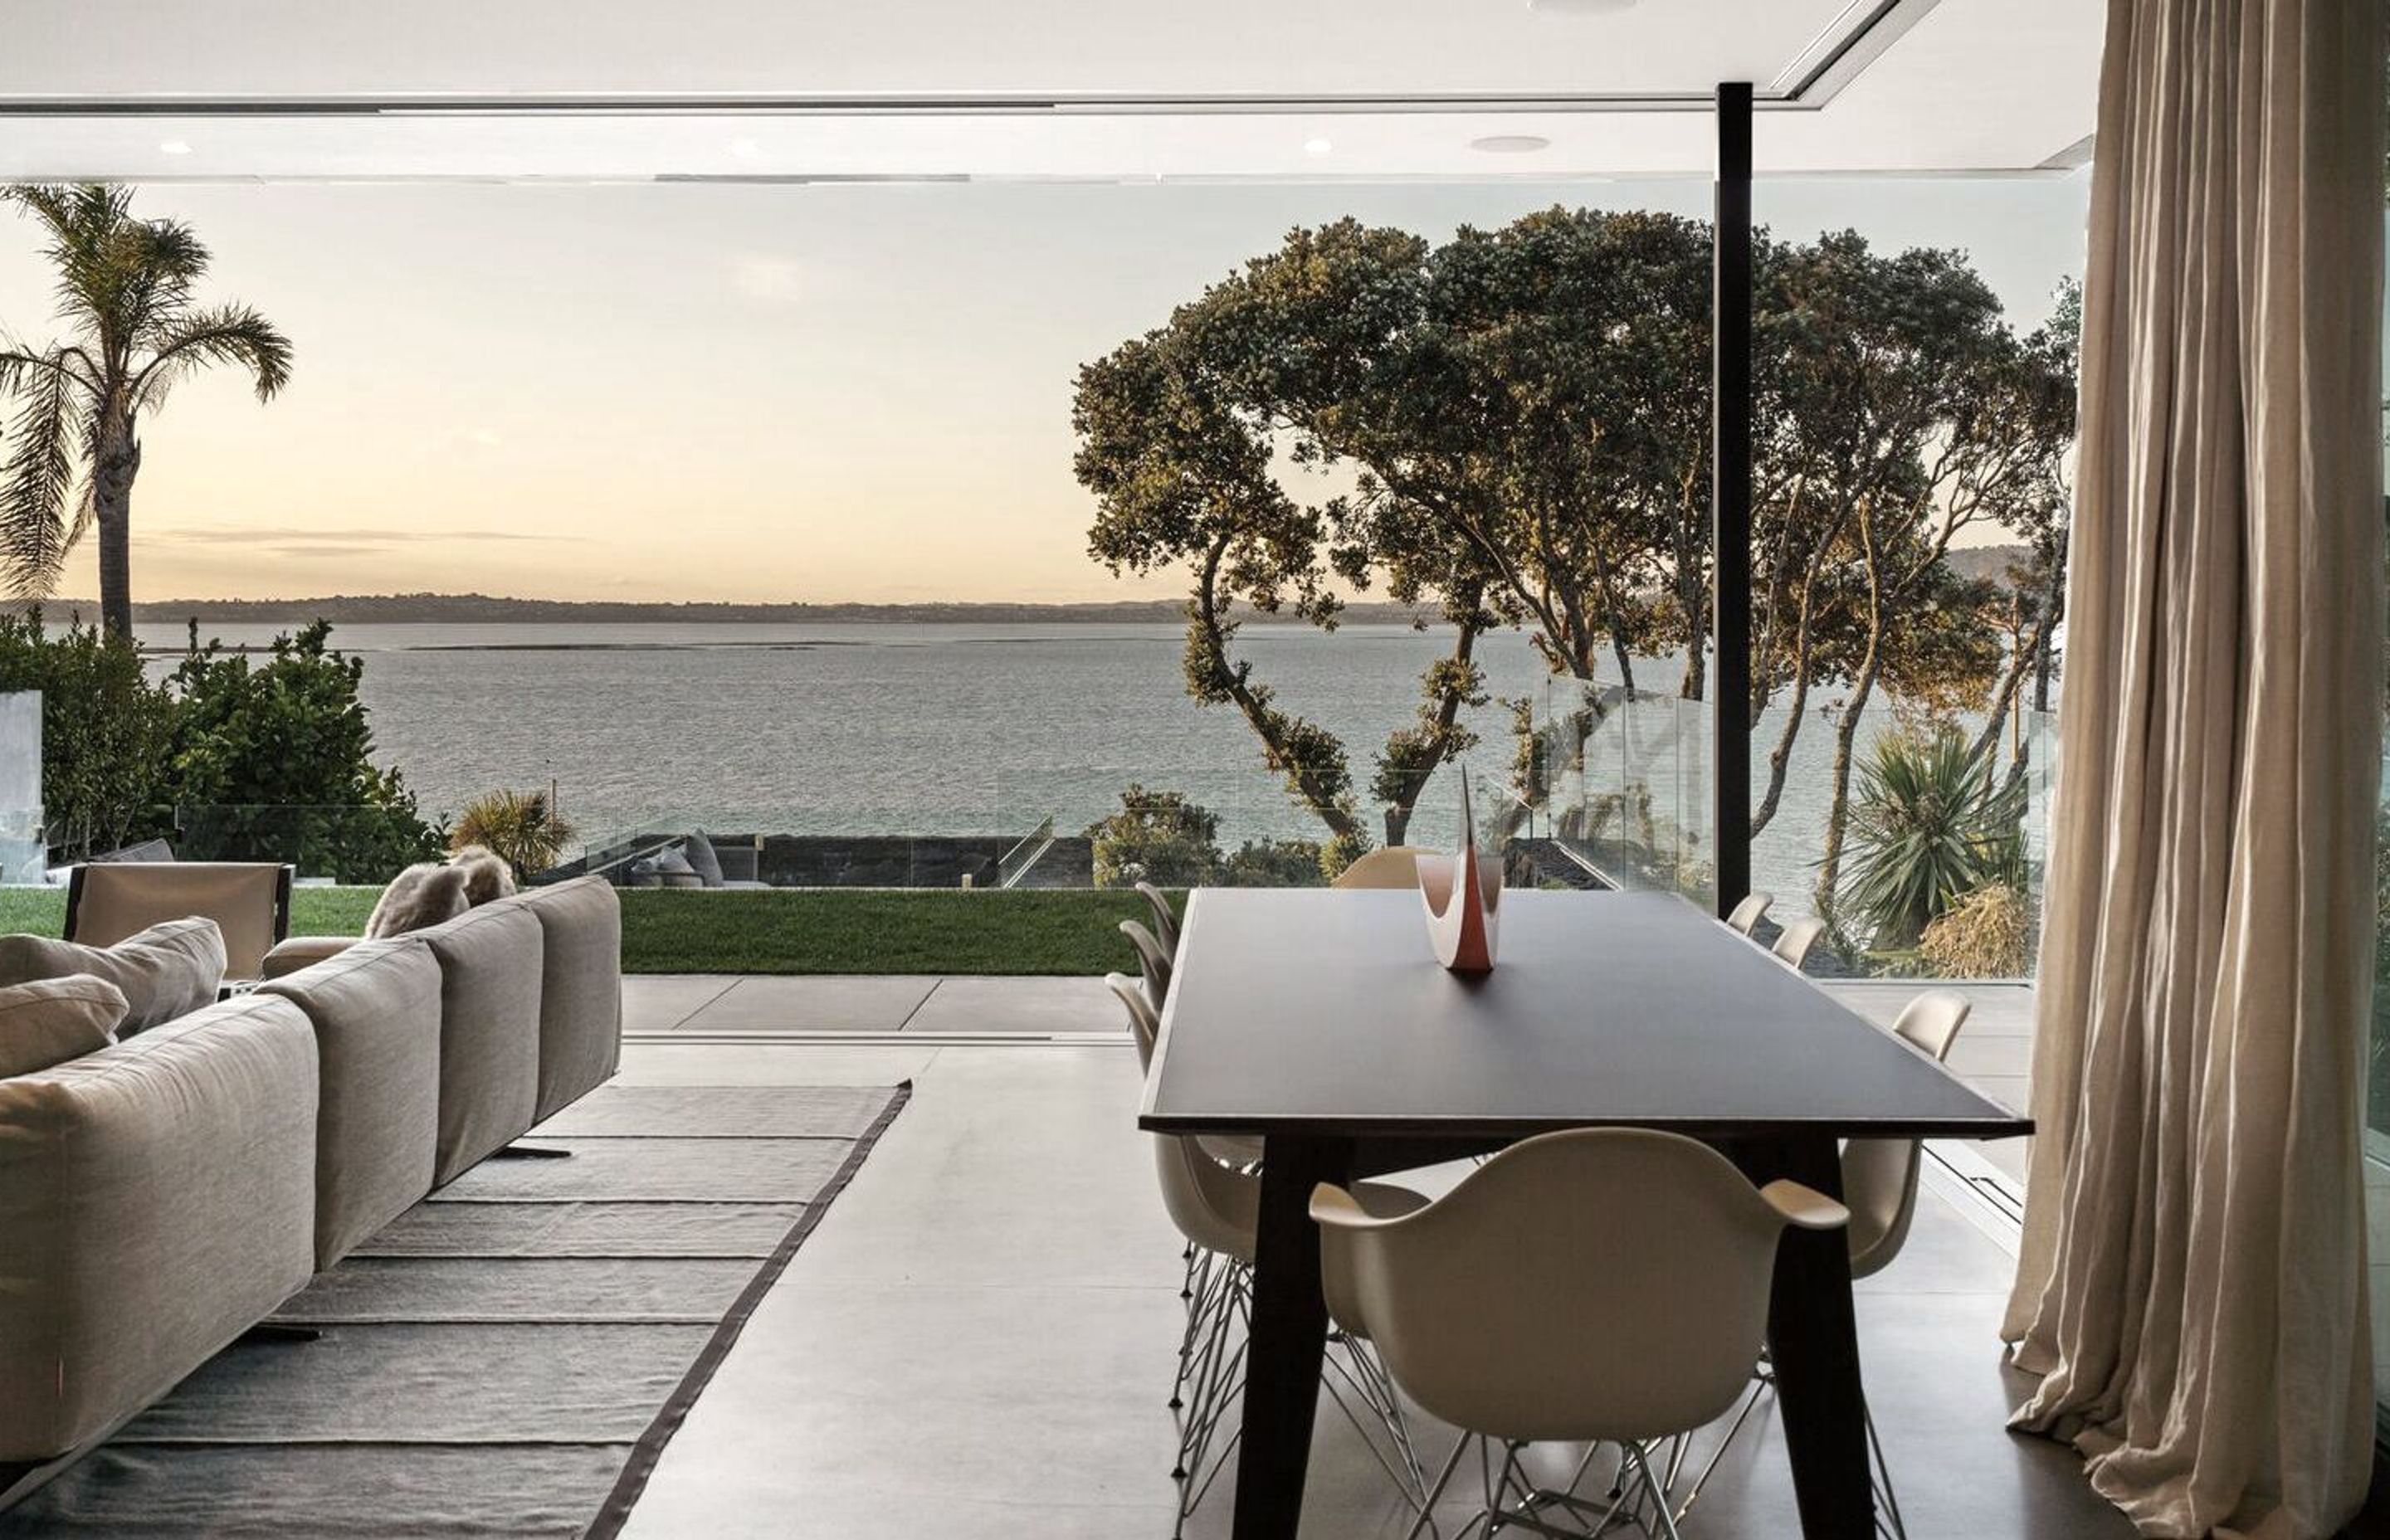 The owners enjoy a coastal lifestyle at Sea Wall House, which is only a 10-minute drive from the centre of Auckland city.